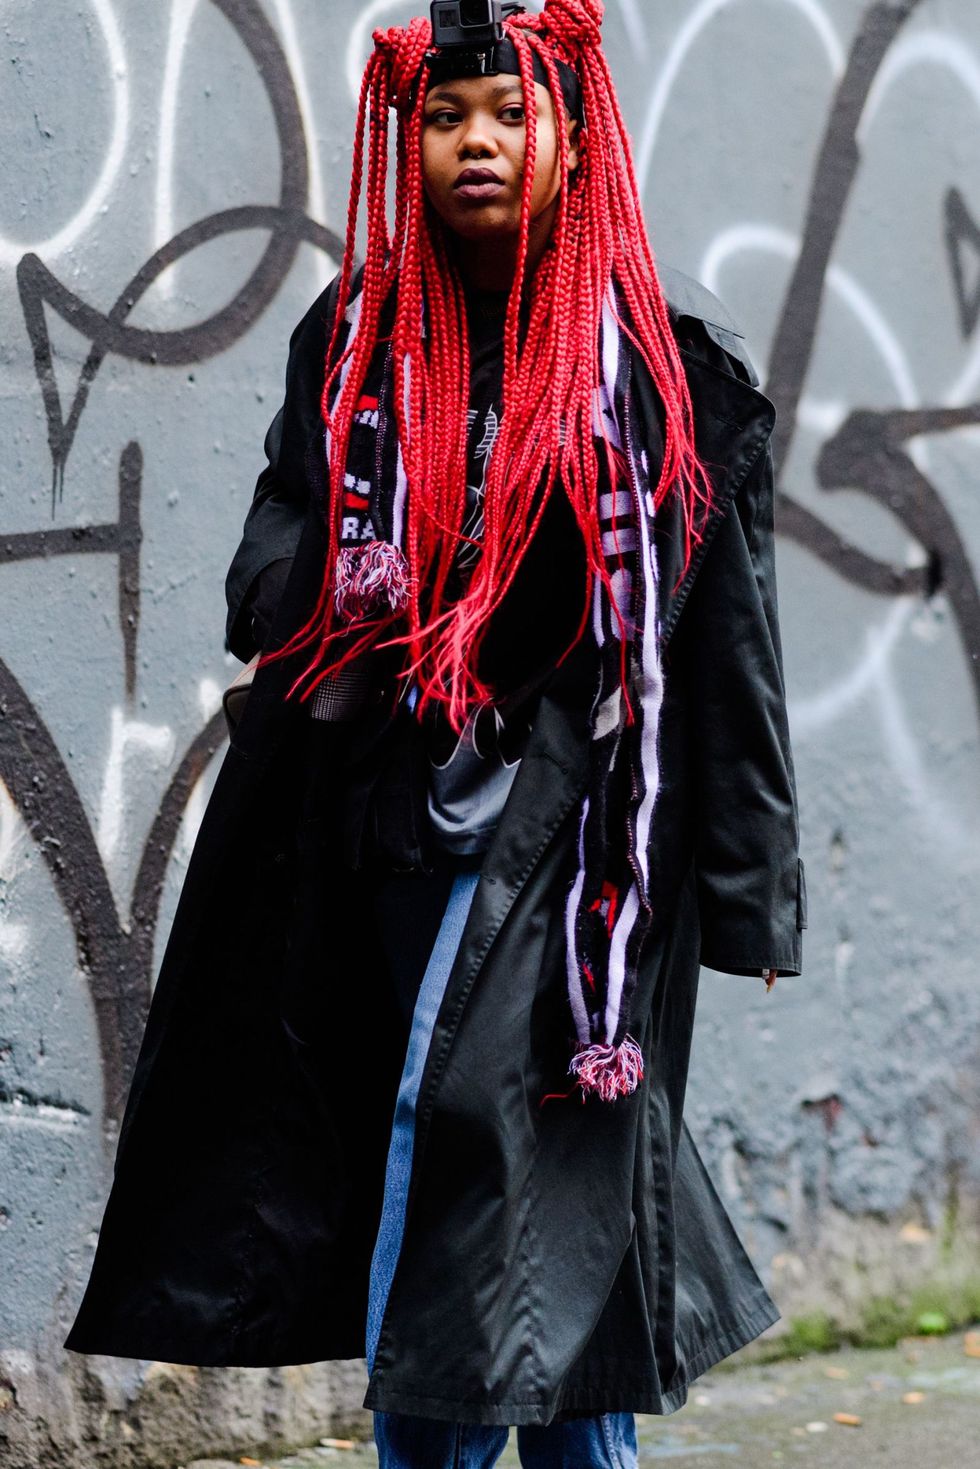 People, Clothing, Fashion, Street fashion, Hairstyle, Costume, Outerwear, Goth subculture, Long hair, Dreadlocks, 